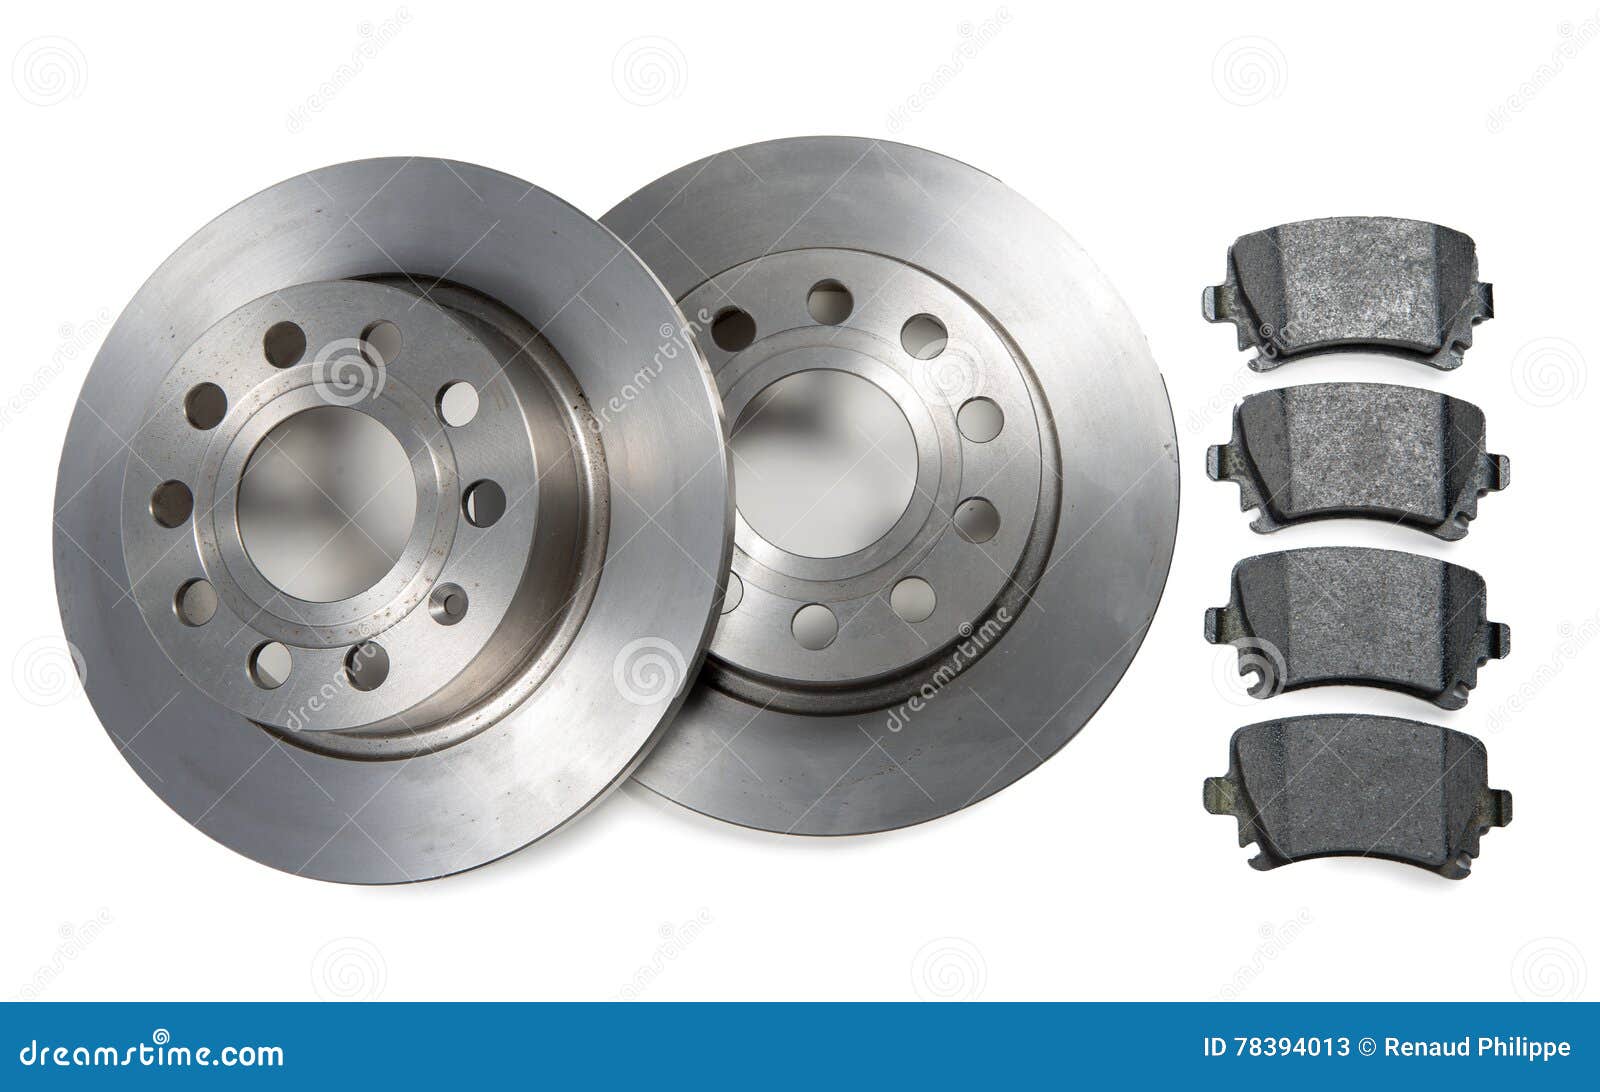 pair of car brake discs and pads on white background